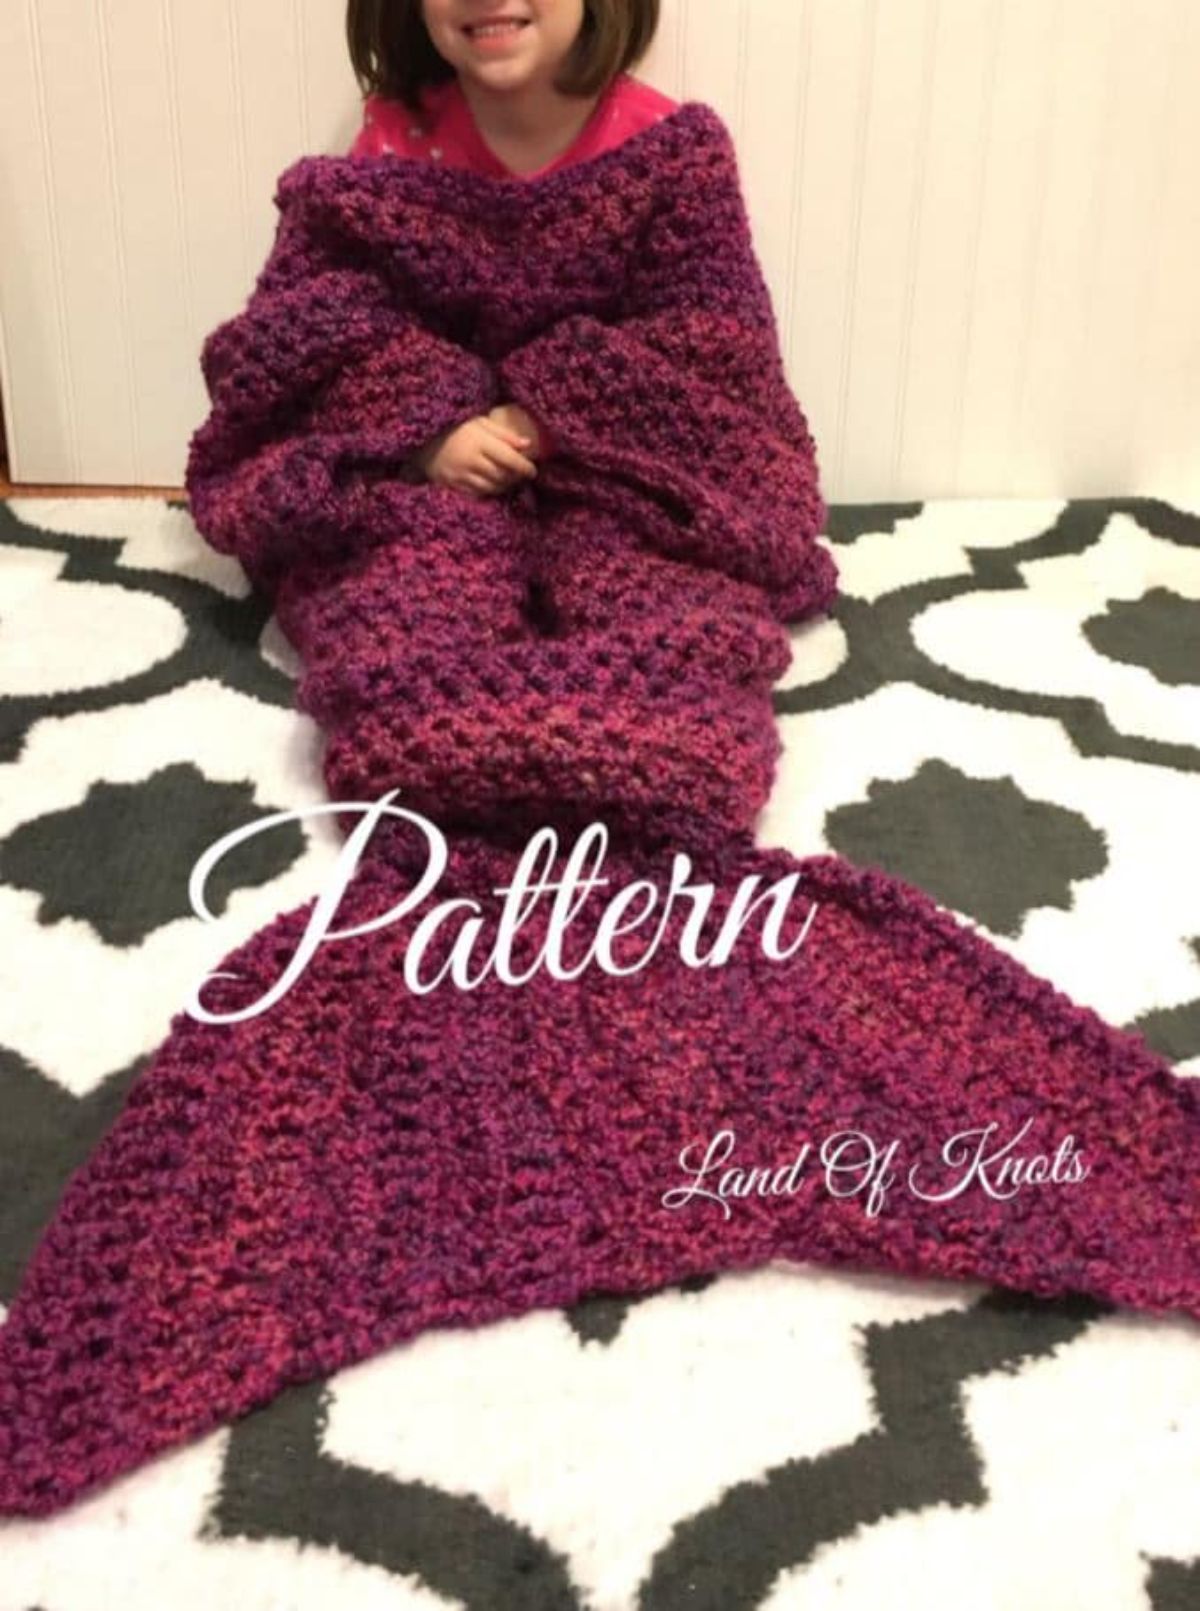 Dark purple crochet blanket with mermaid tail worn by a smiling brunette woman sitting on a black and white carpet. 